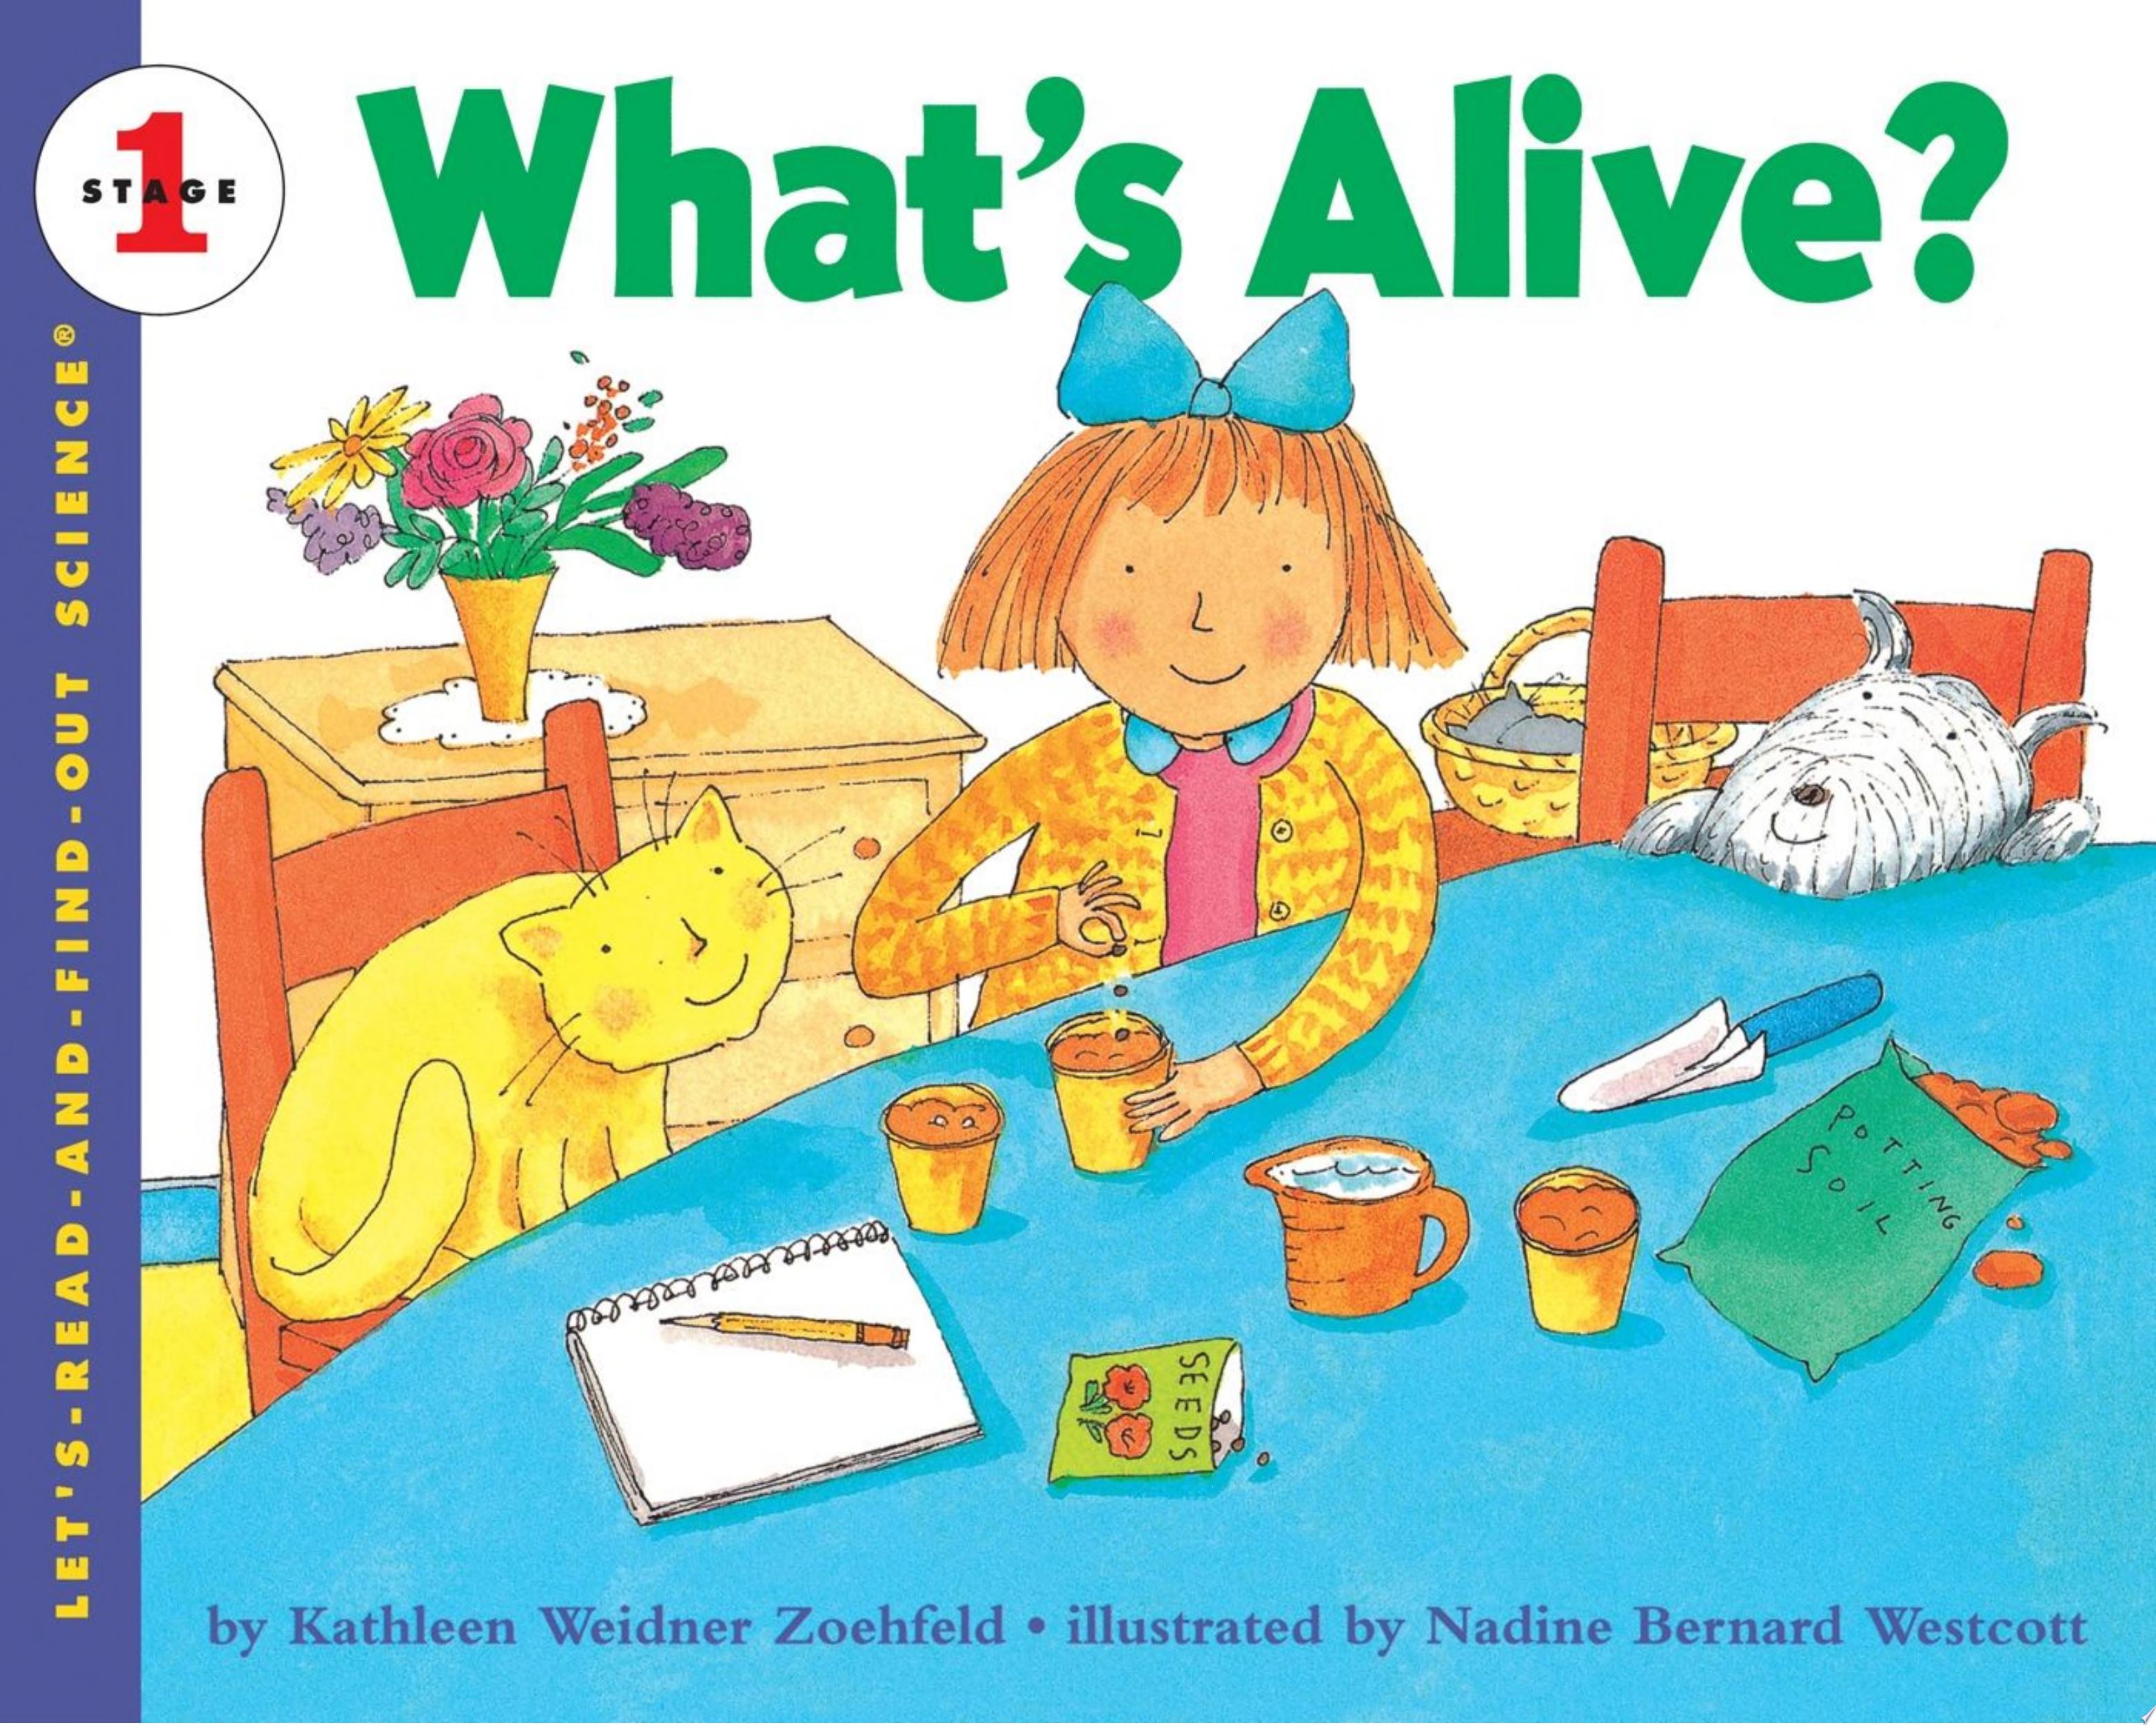 Image for "What's Alive?"